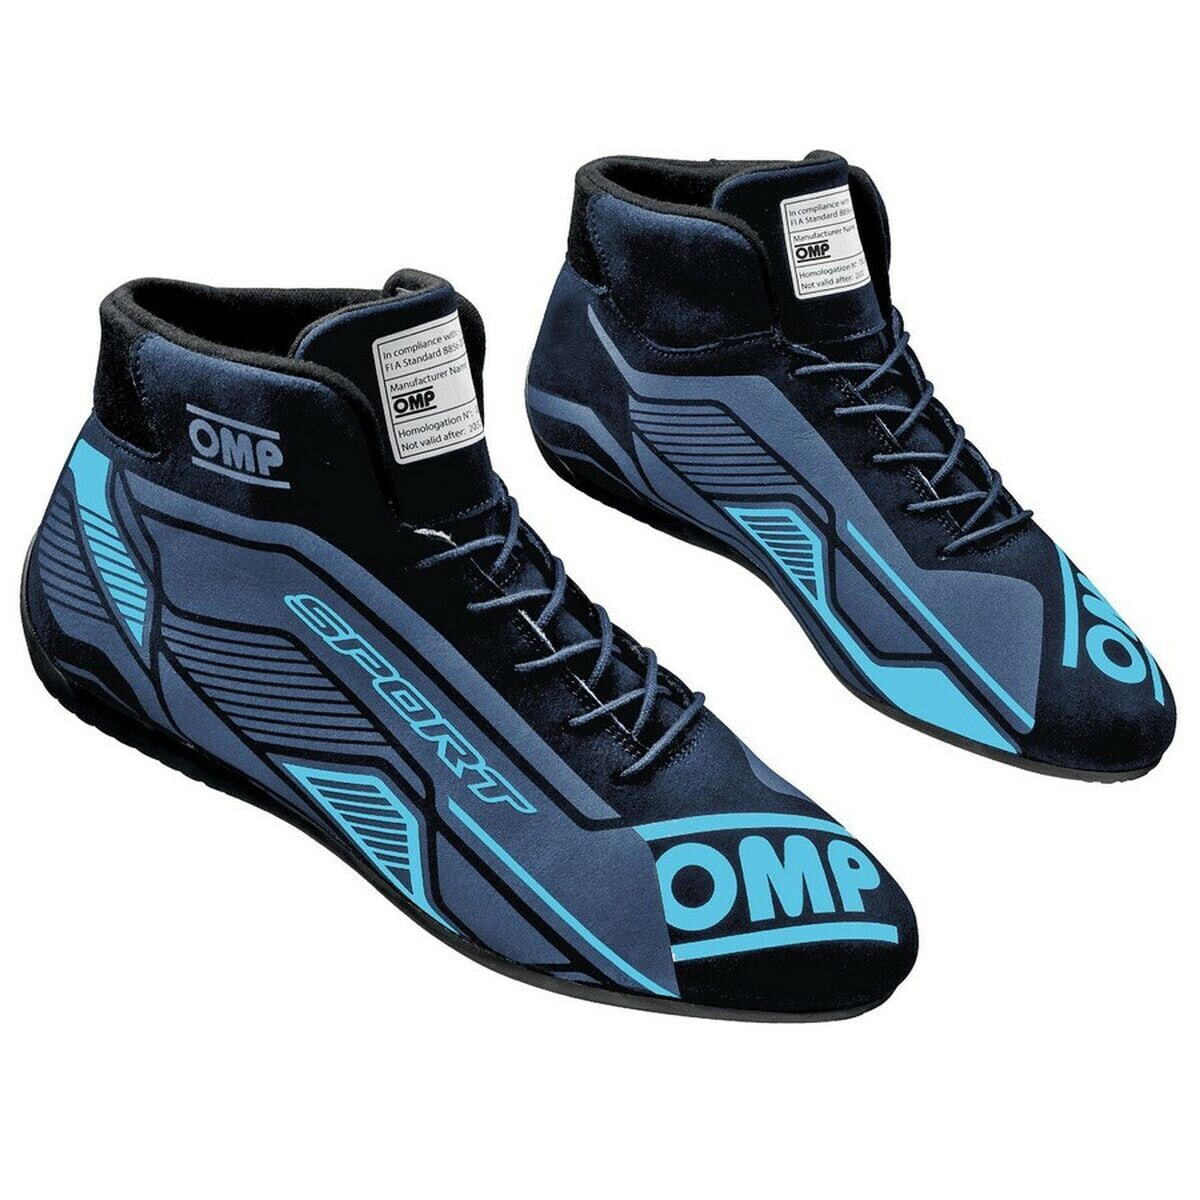 Racing Ankle Boots OMP SPORT Black/Blue 40